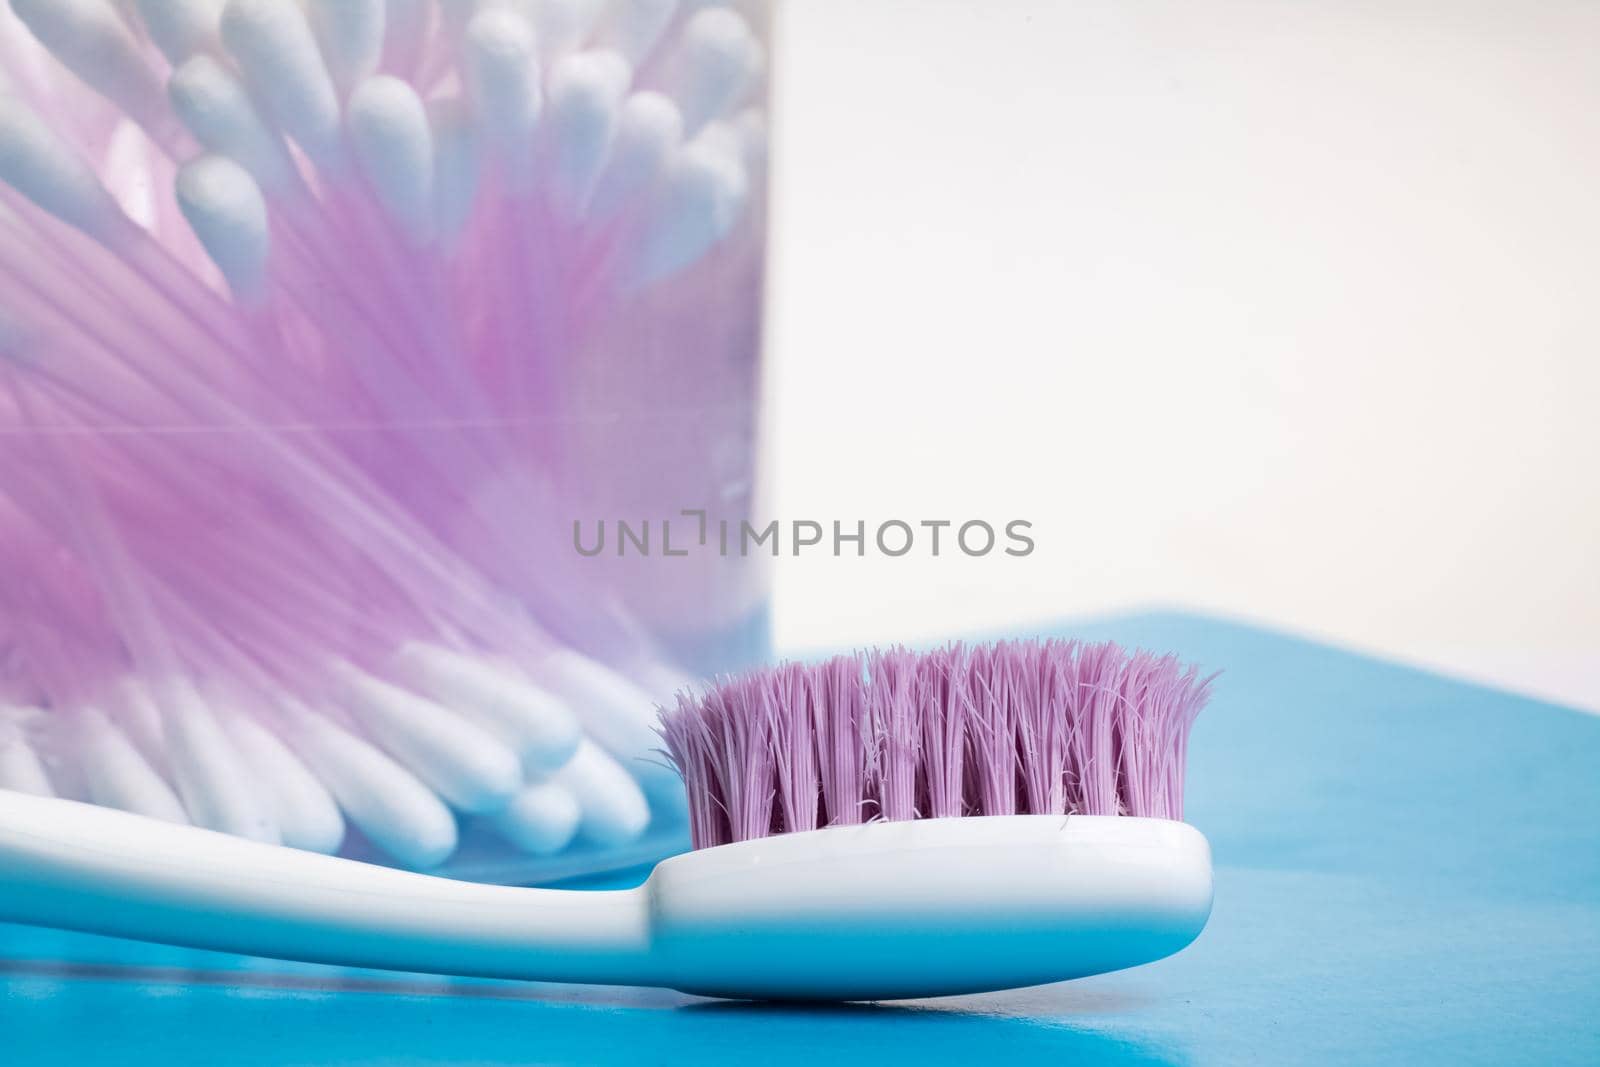 Cotton buds and toothbrush on the table in the bathroom by Vera1703